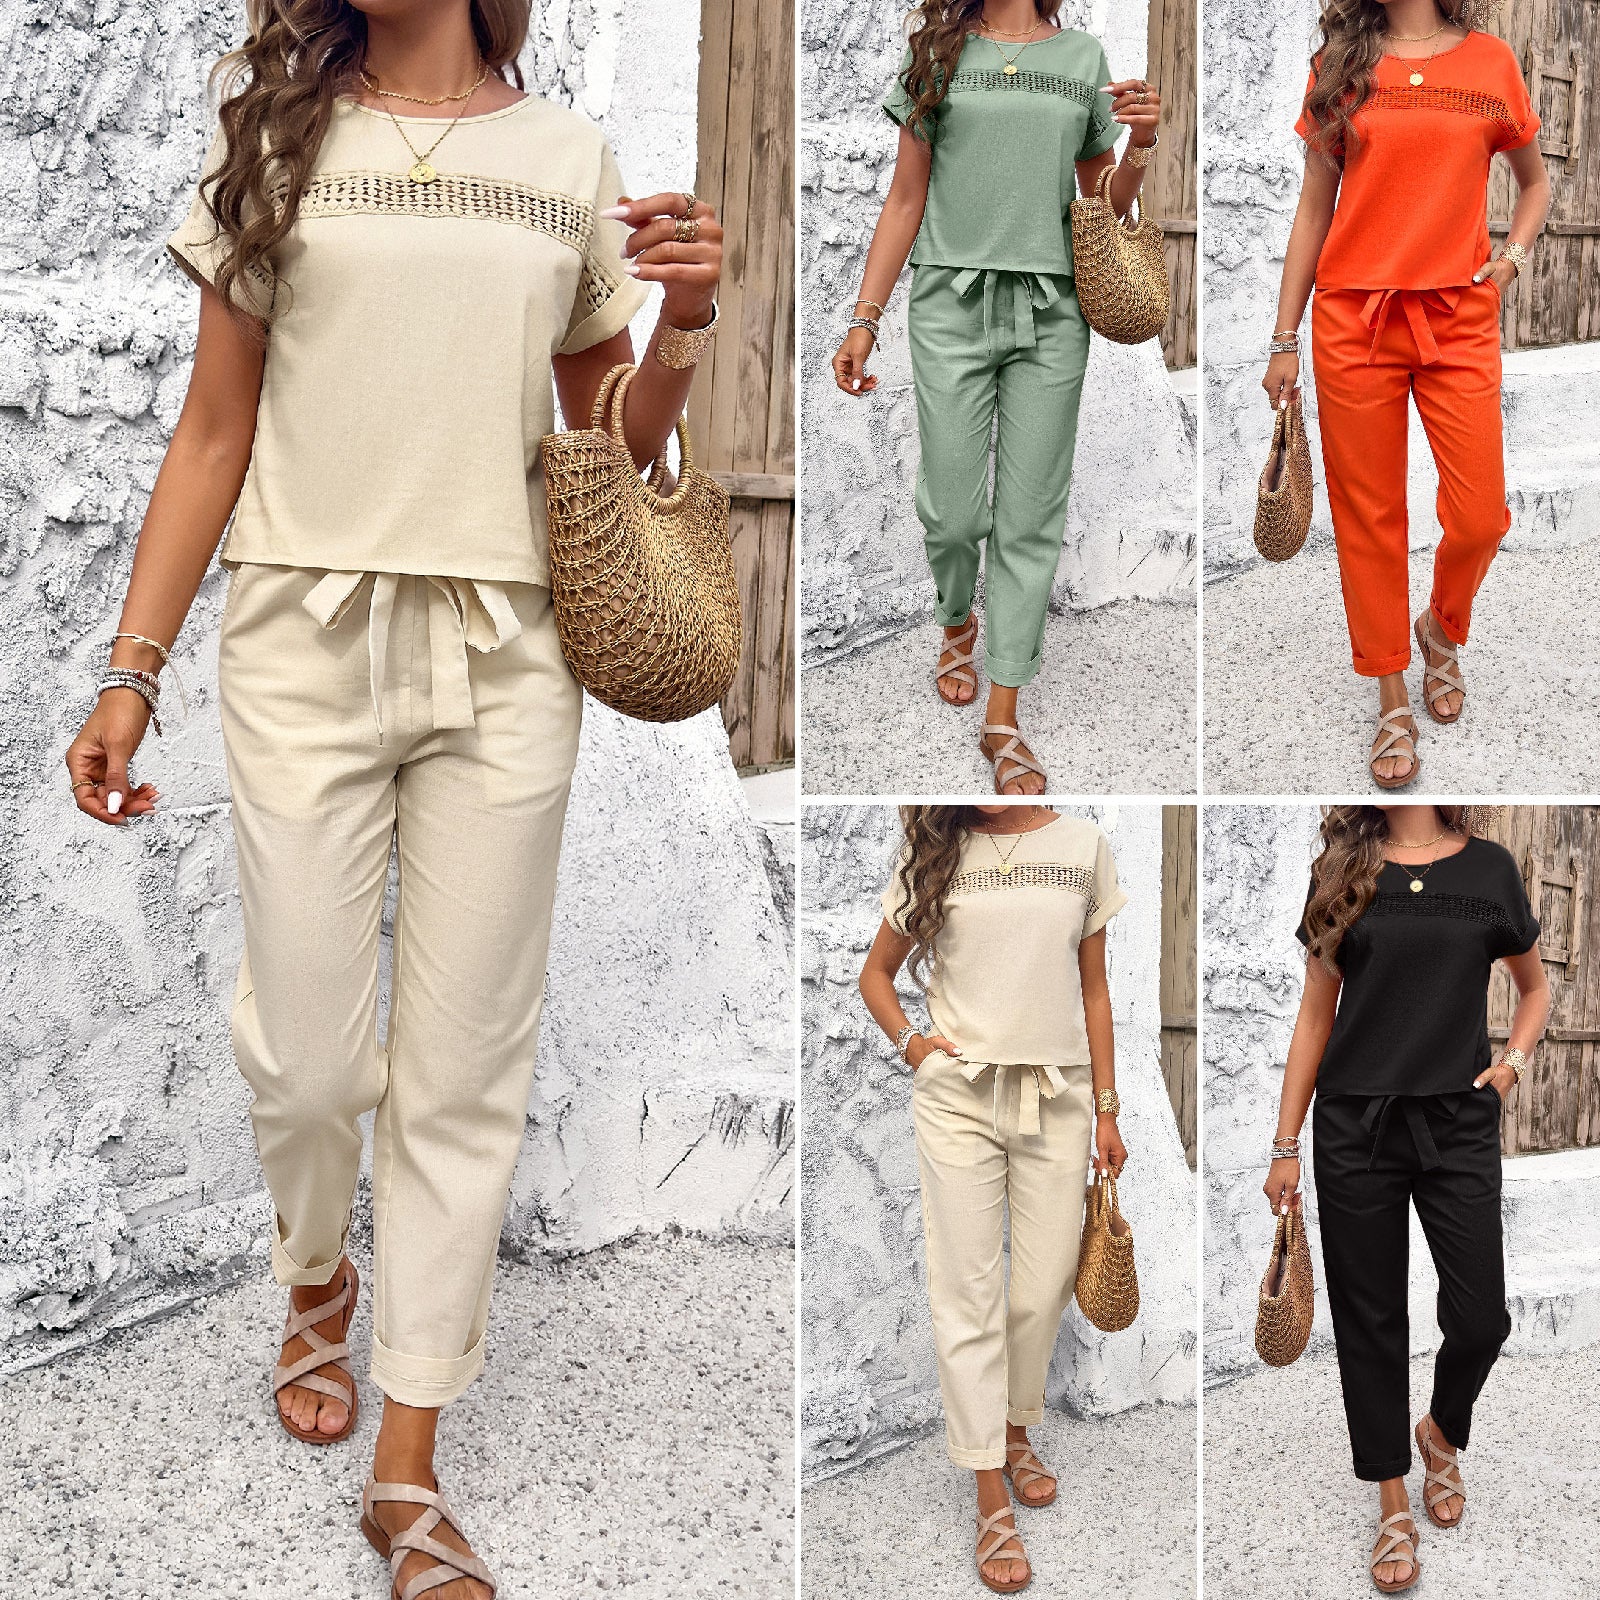 Women Clothing Shein Spring Summer Casual Short Sleeve Top Trousers Suit